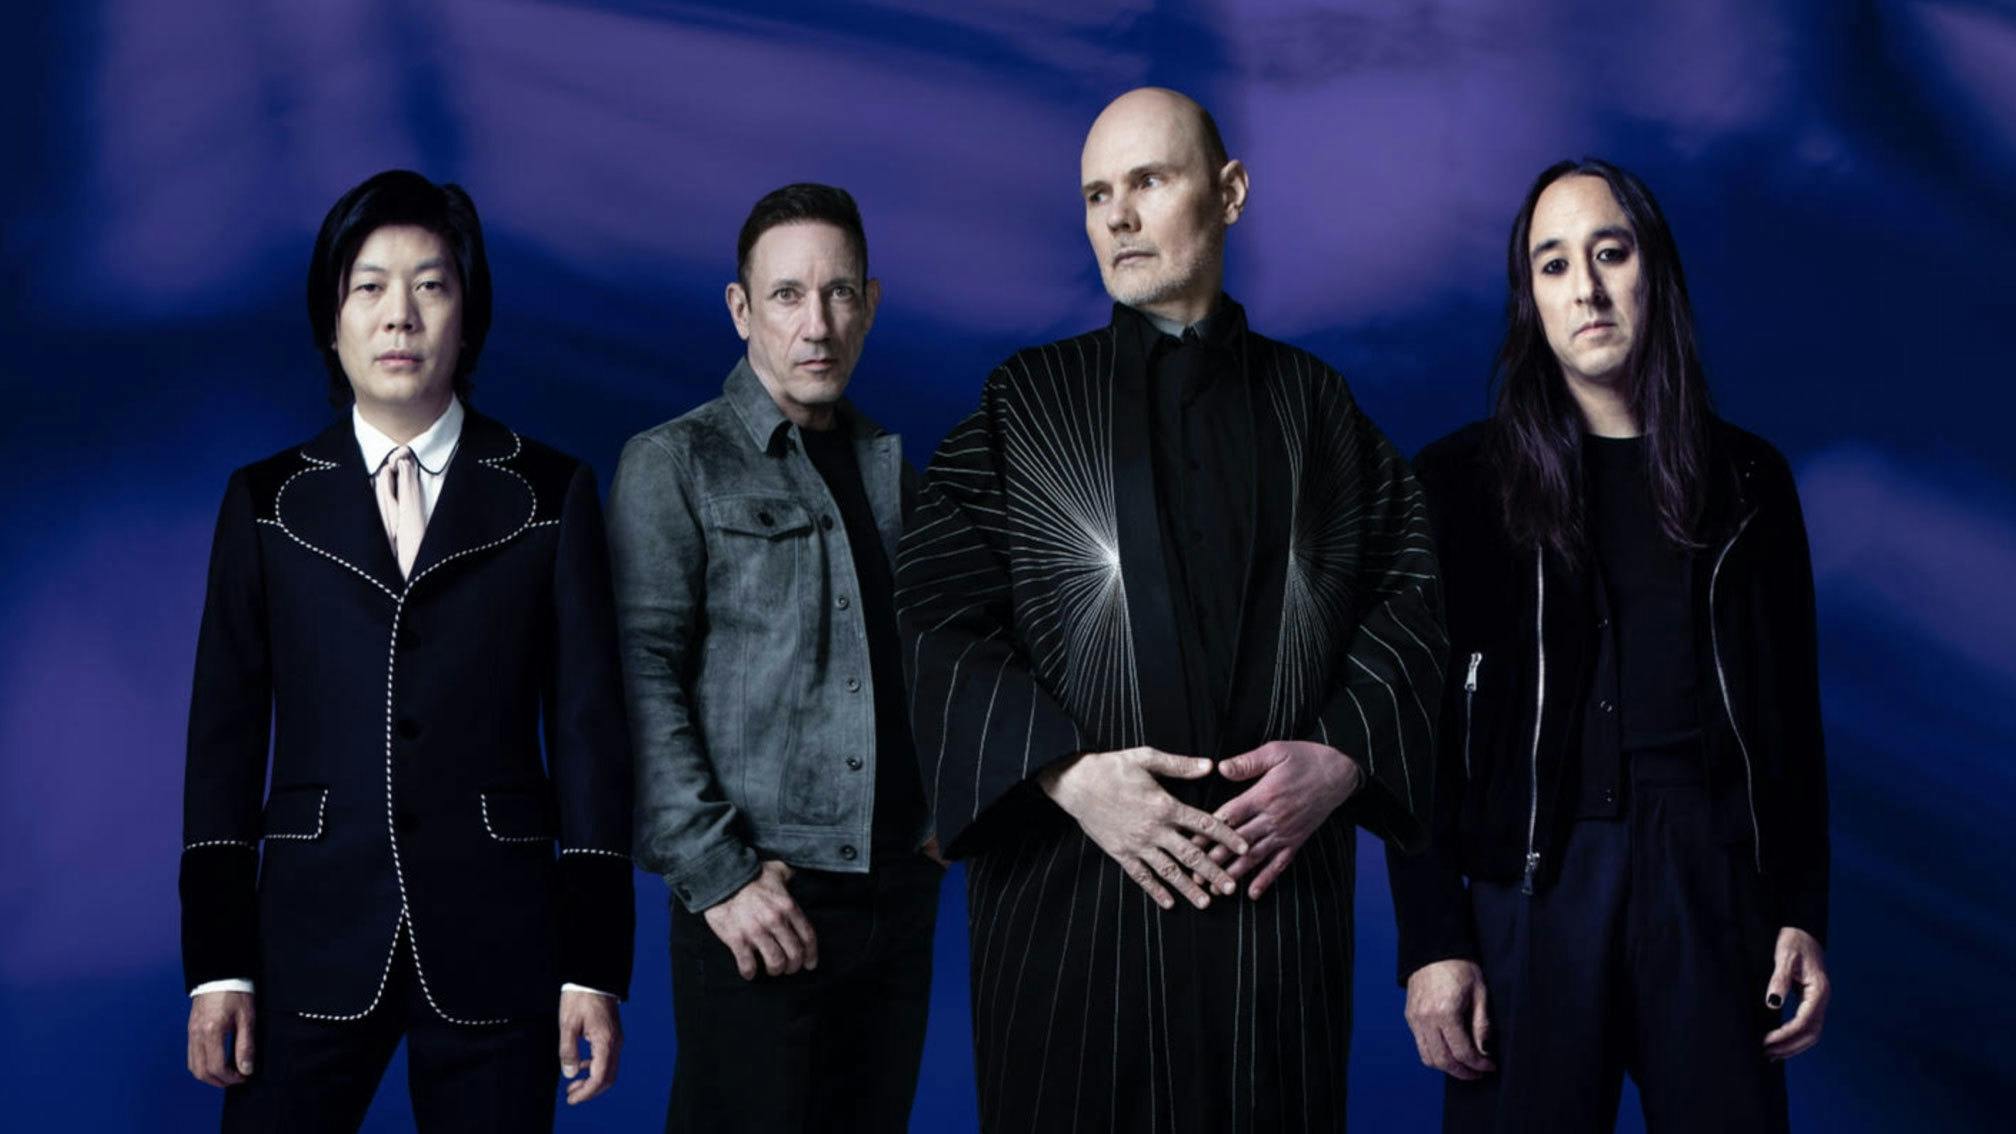 The Smashing Pumpkins announce 32-date U.S. arena tour with Jane’s Addiction, Poppy